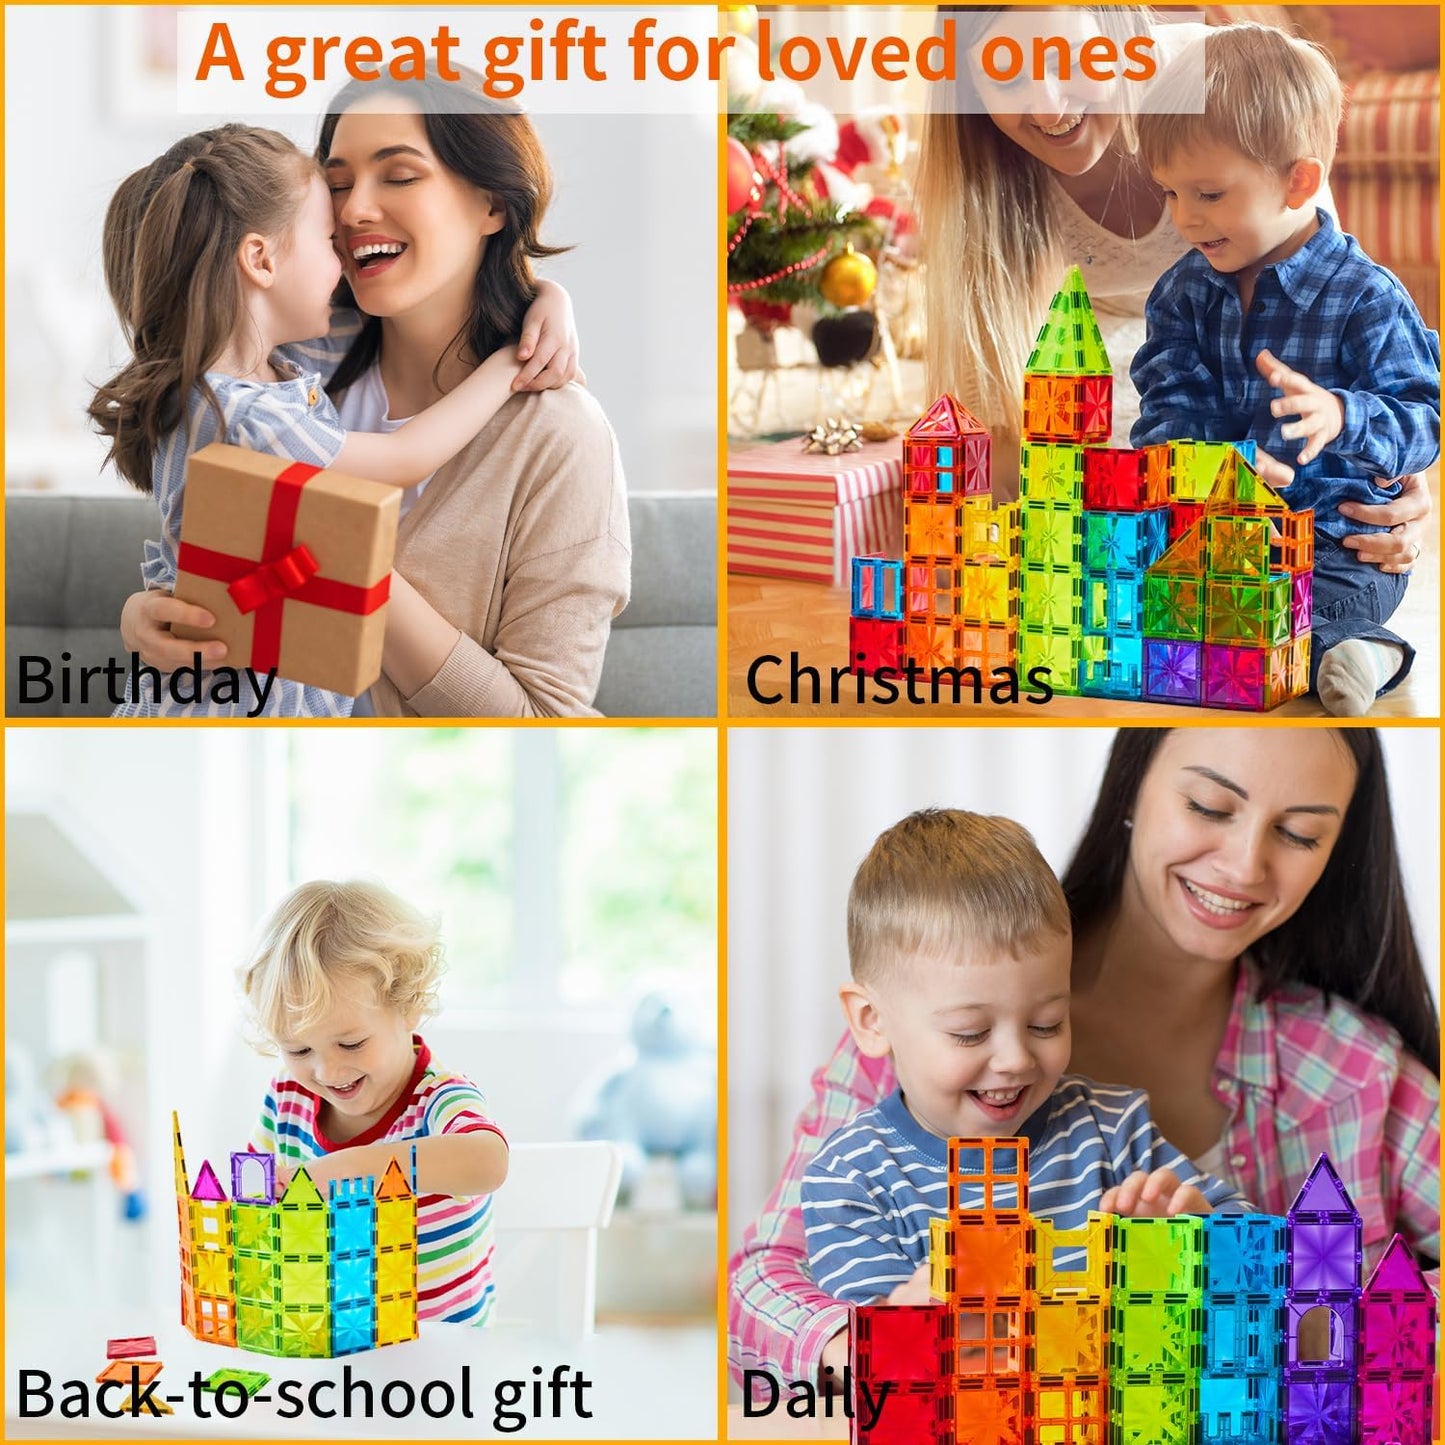 Magnetic Tiles Kids Toys, STEM Magnetic Blocks Building Toys for Boys and Girls, Colorful Diamond Pattern Magnet Tiles Preschool Sensory Montessori Toys for Toddler, Creative Gift for Age 3+ Years